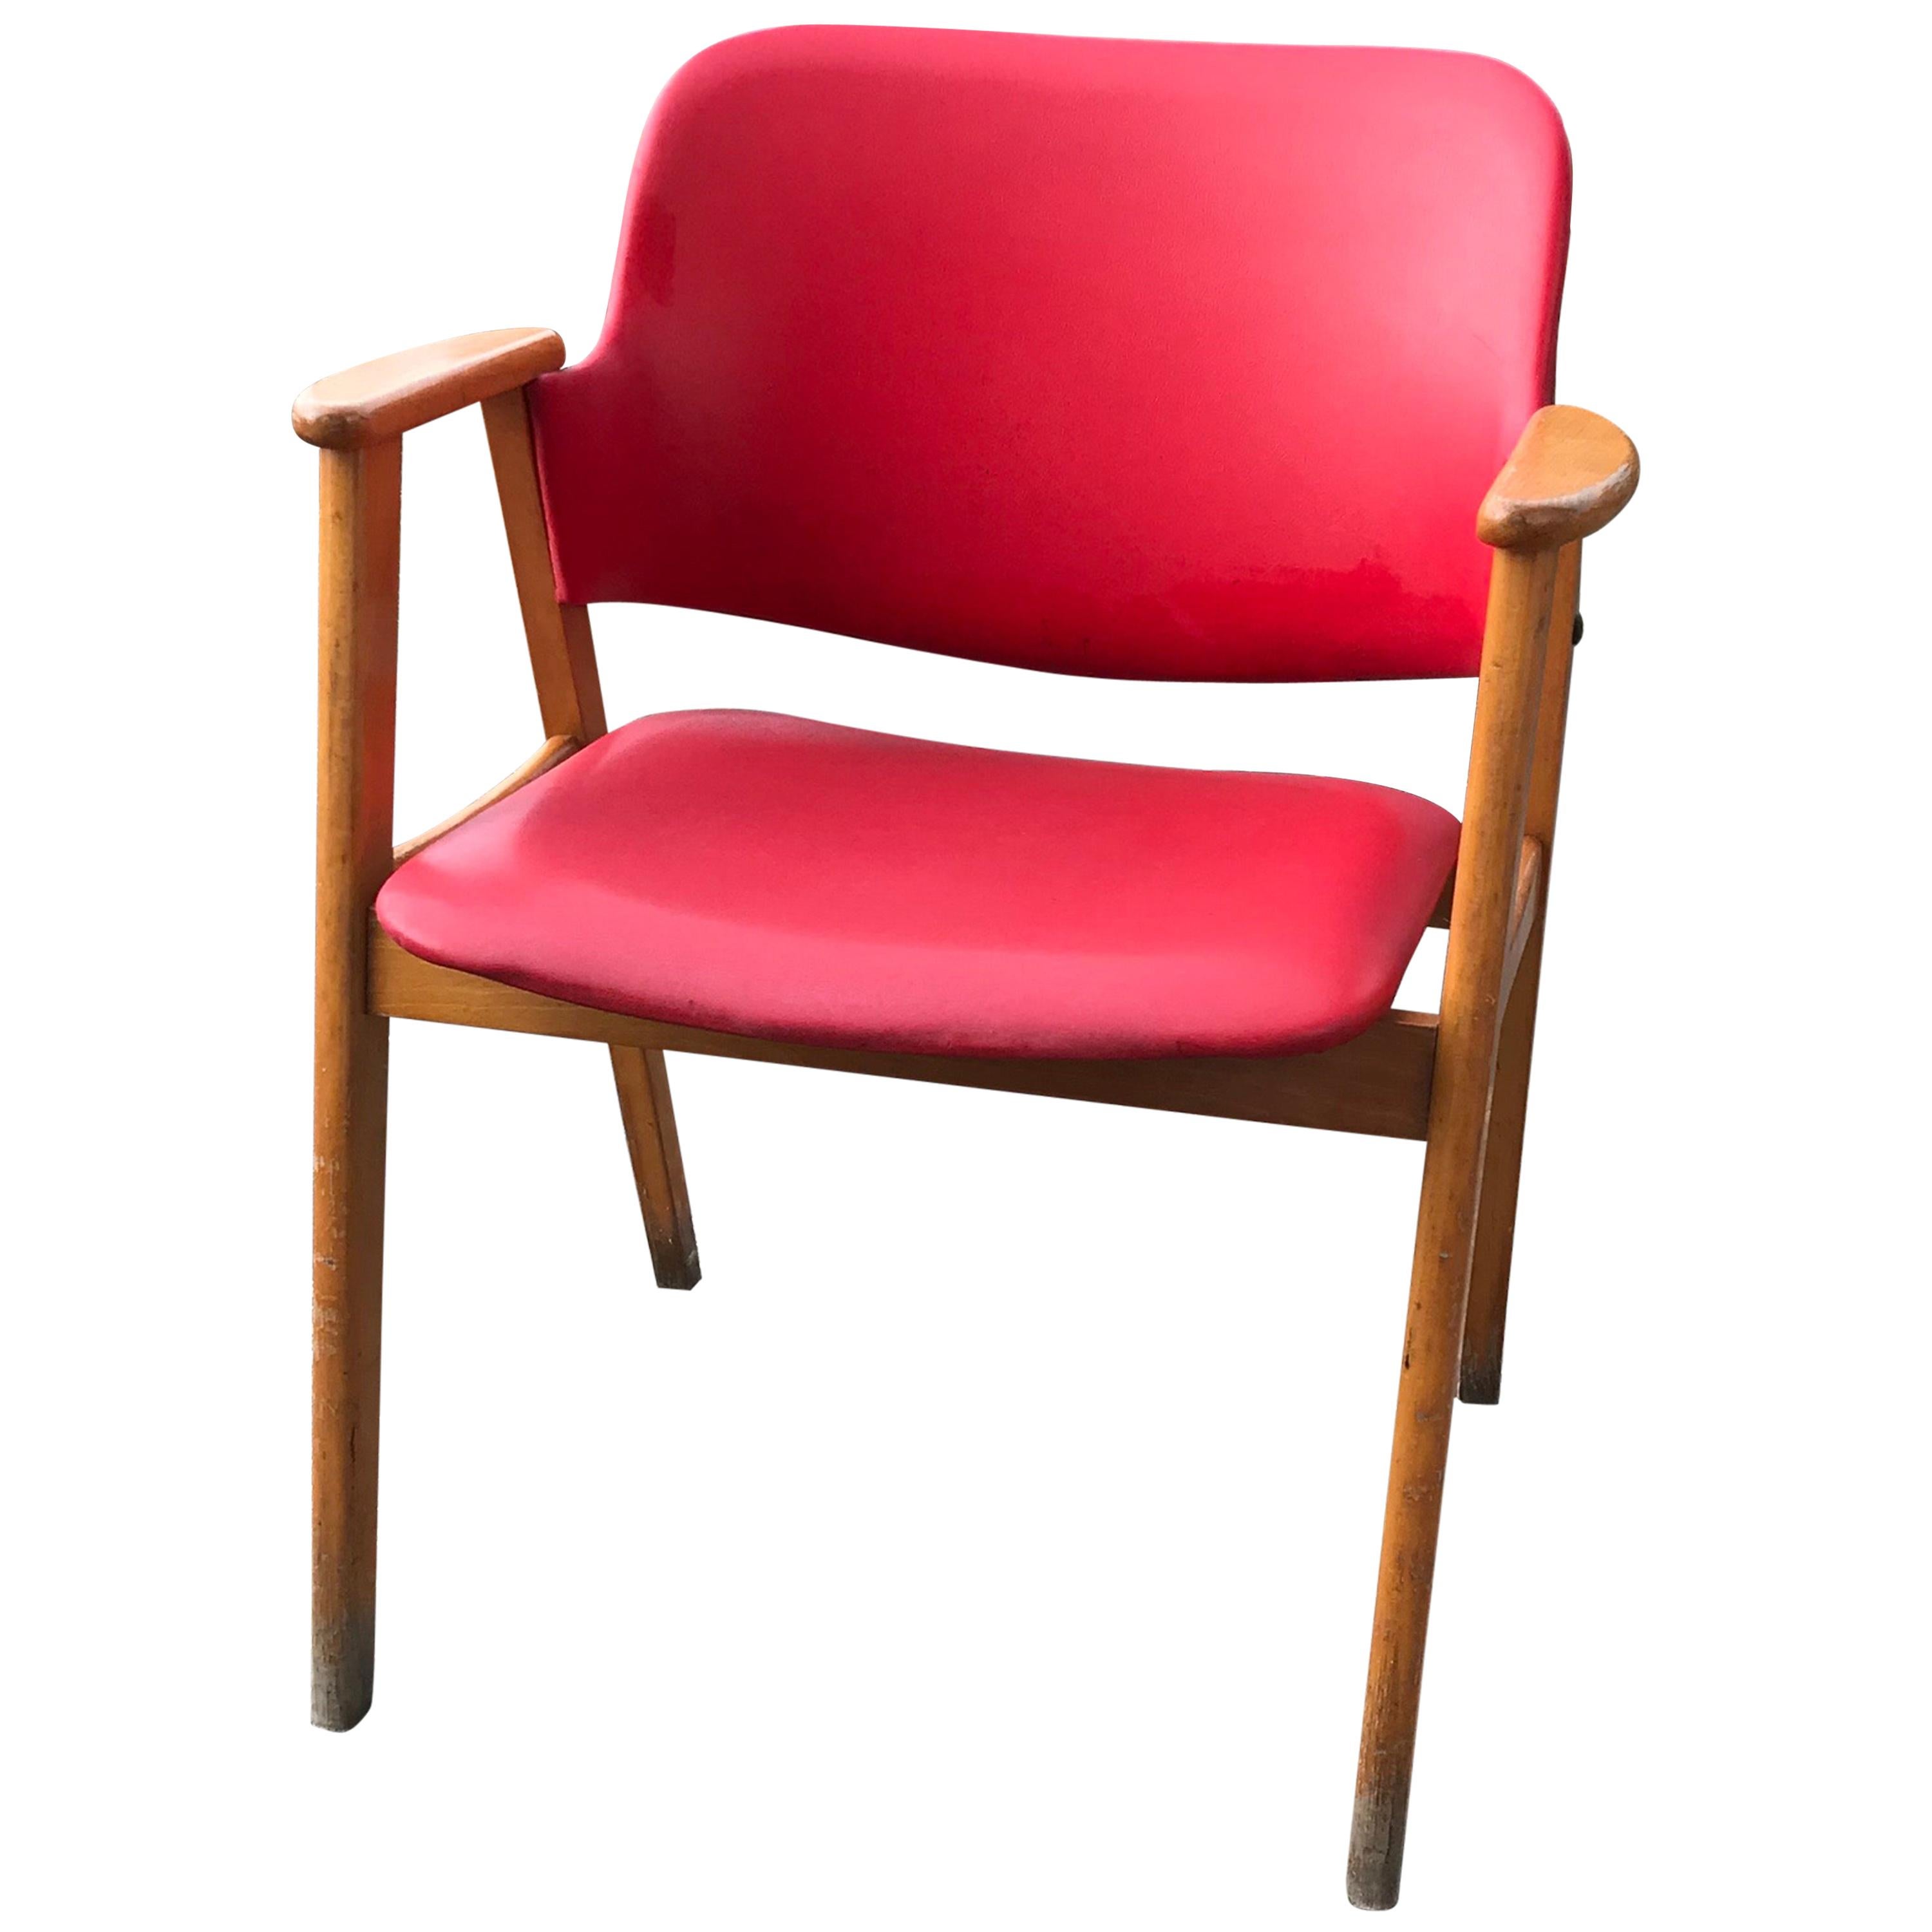 Midcentury Hungarian Chair with Red Faux Leather, circa 1960s For Sale